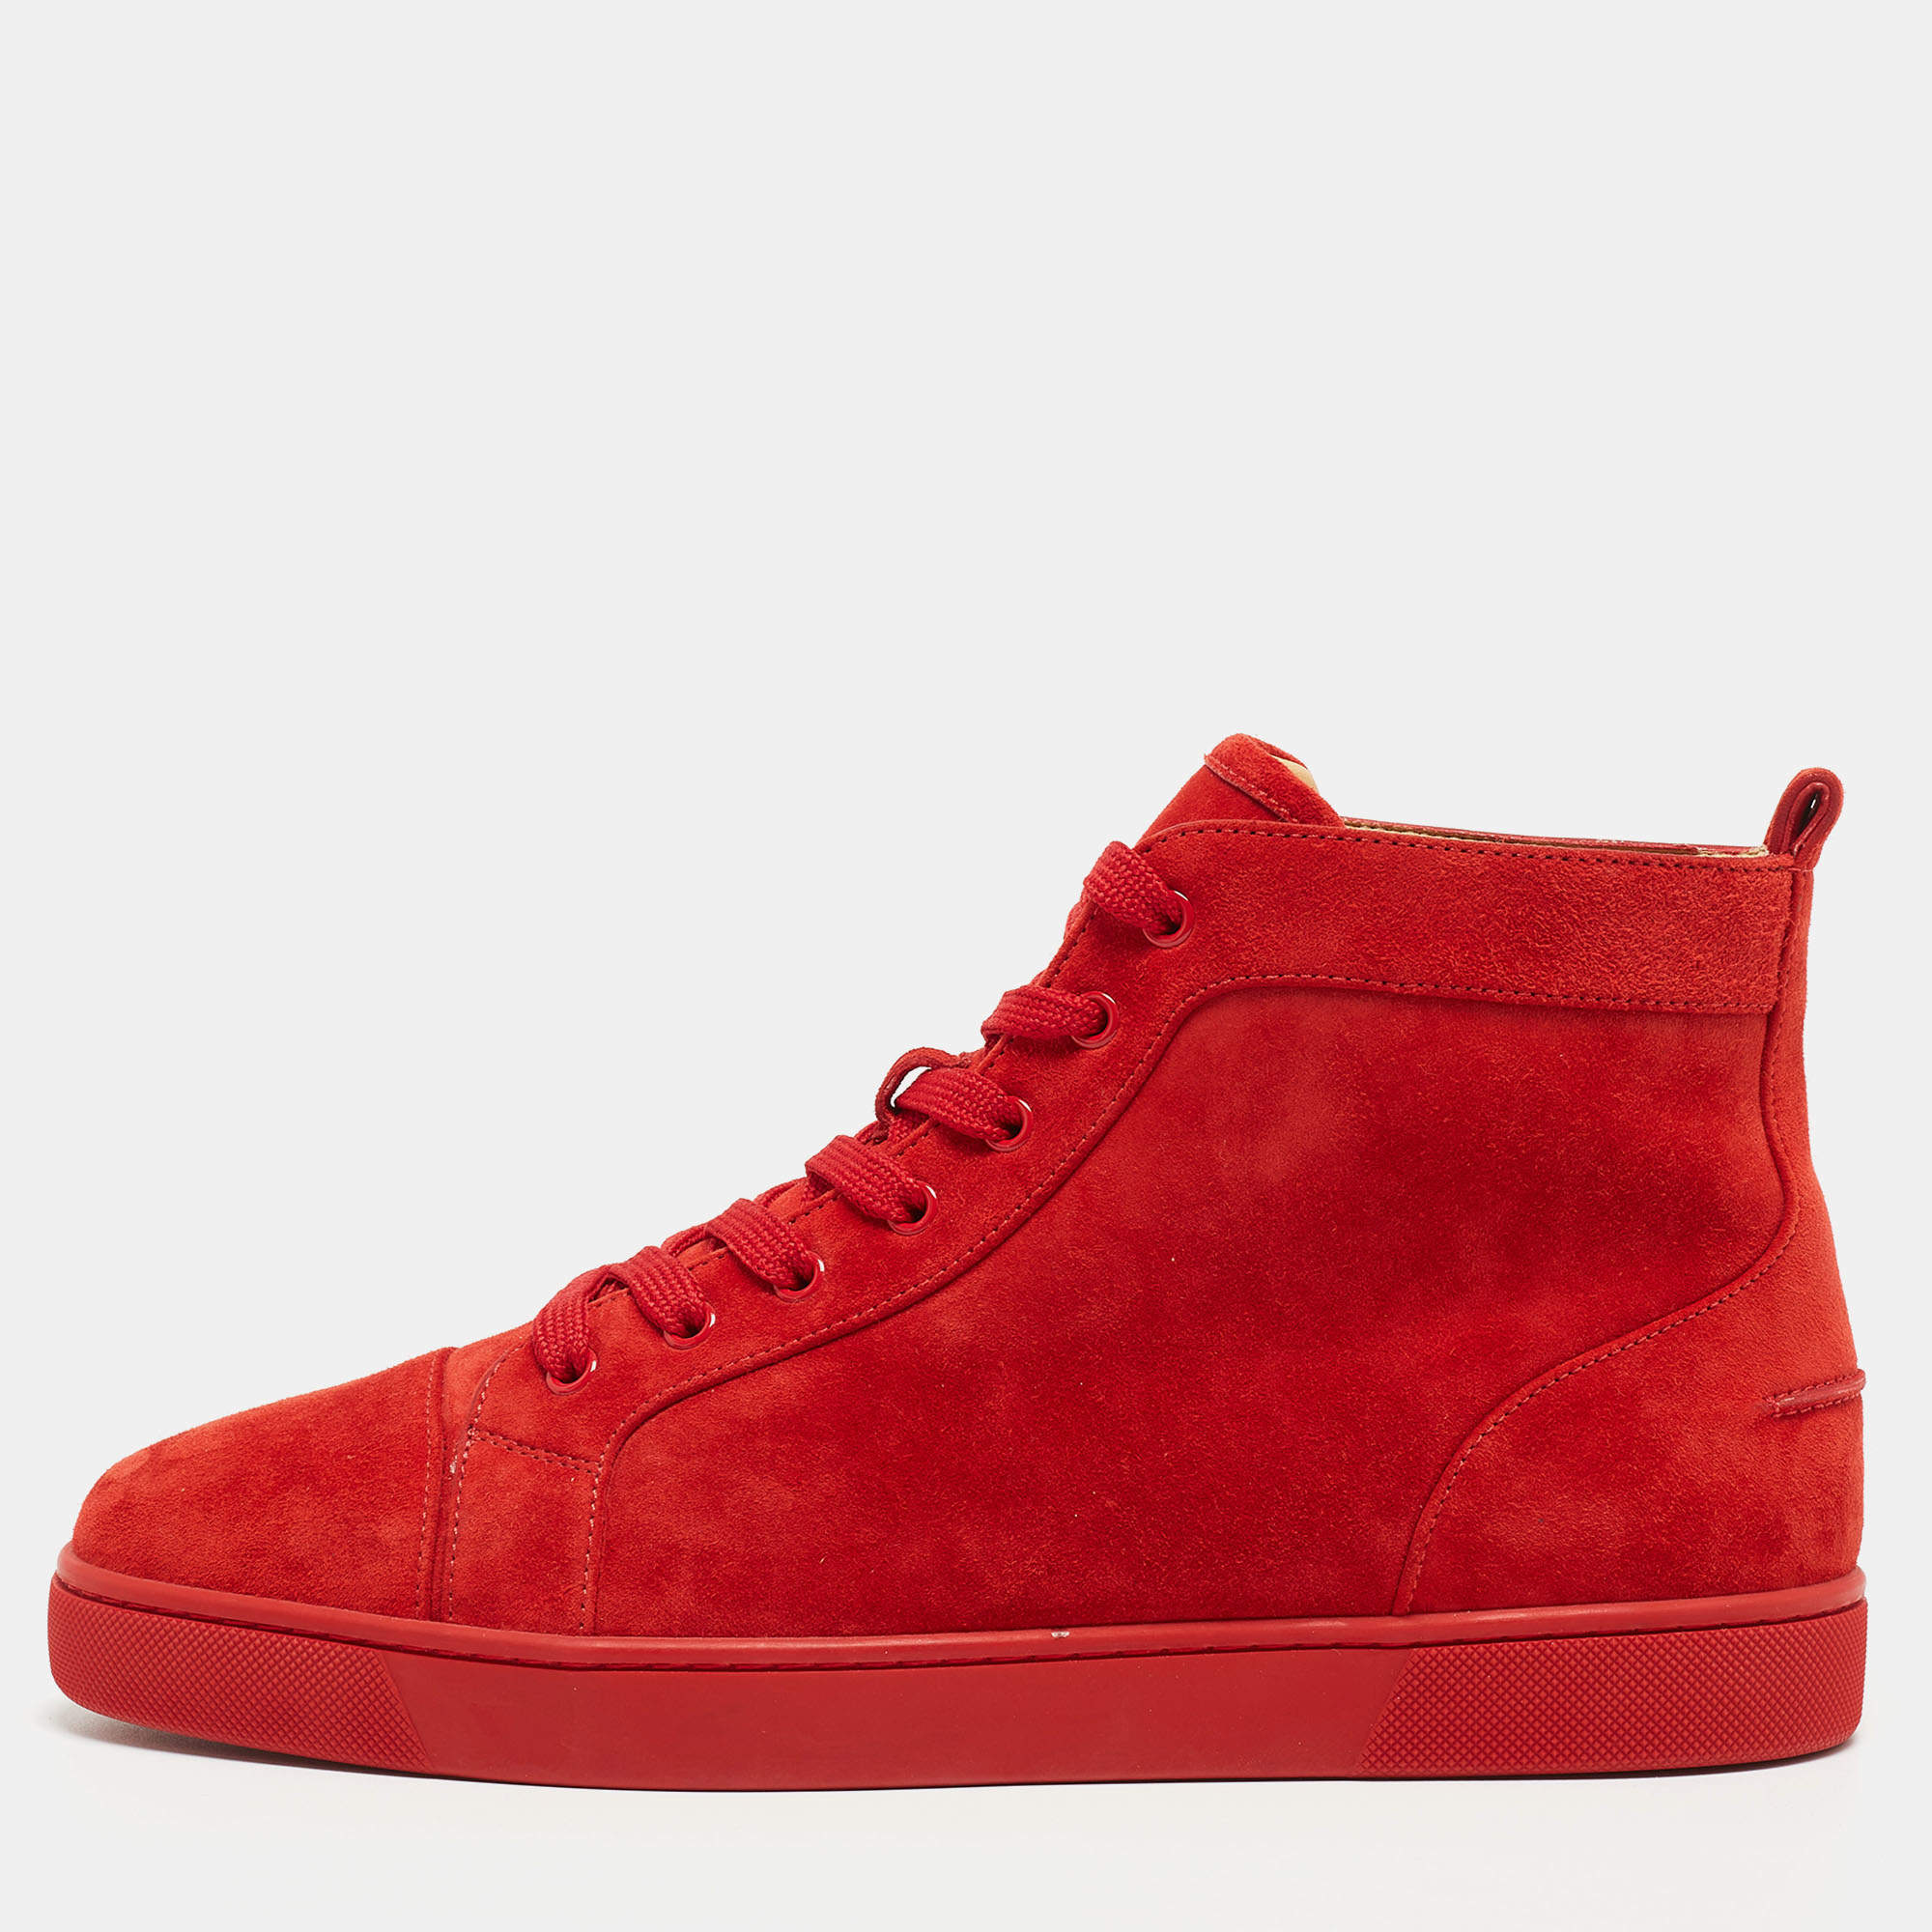 Louis high trainers Christian Louboutin Red size 43 EU in Suede - 22583774